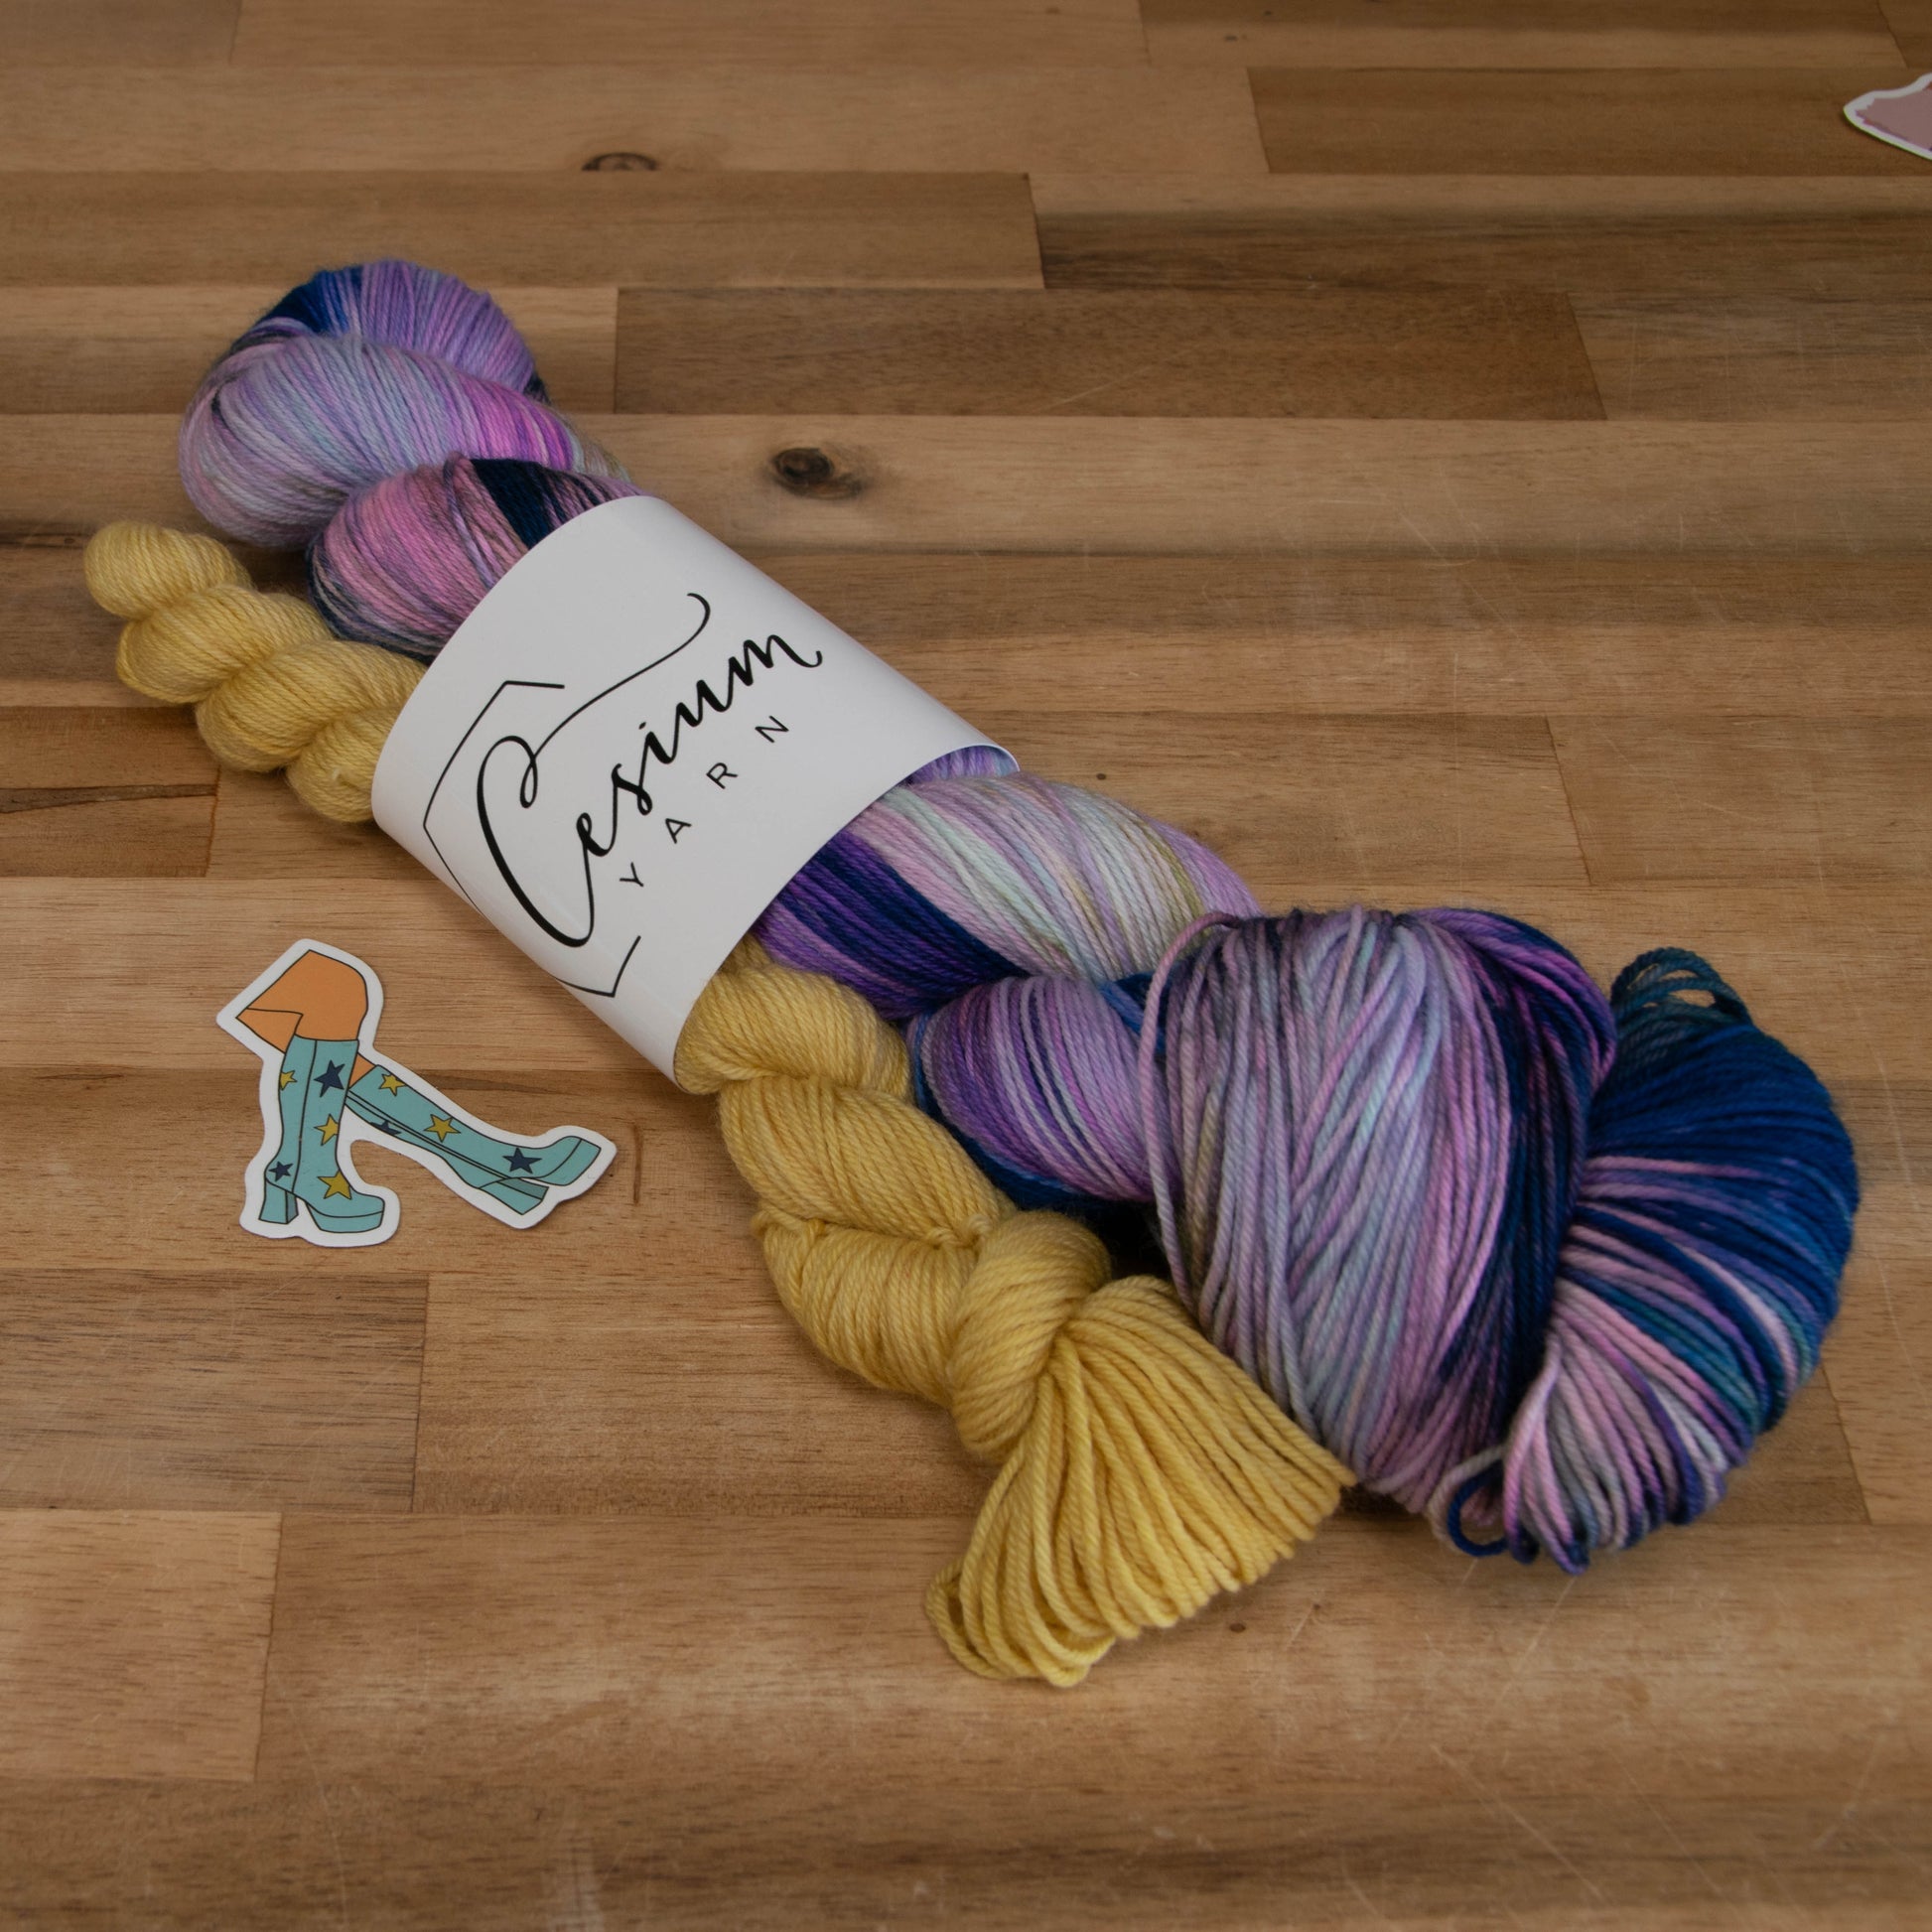 A skein of purple, blue, and pink yarn with a yellow mini skein and a sticker of the Go-Go boots from Mamma Mia.